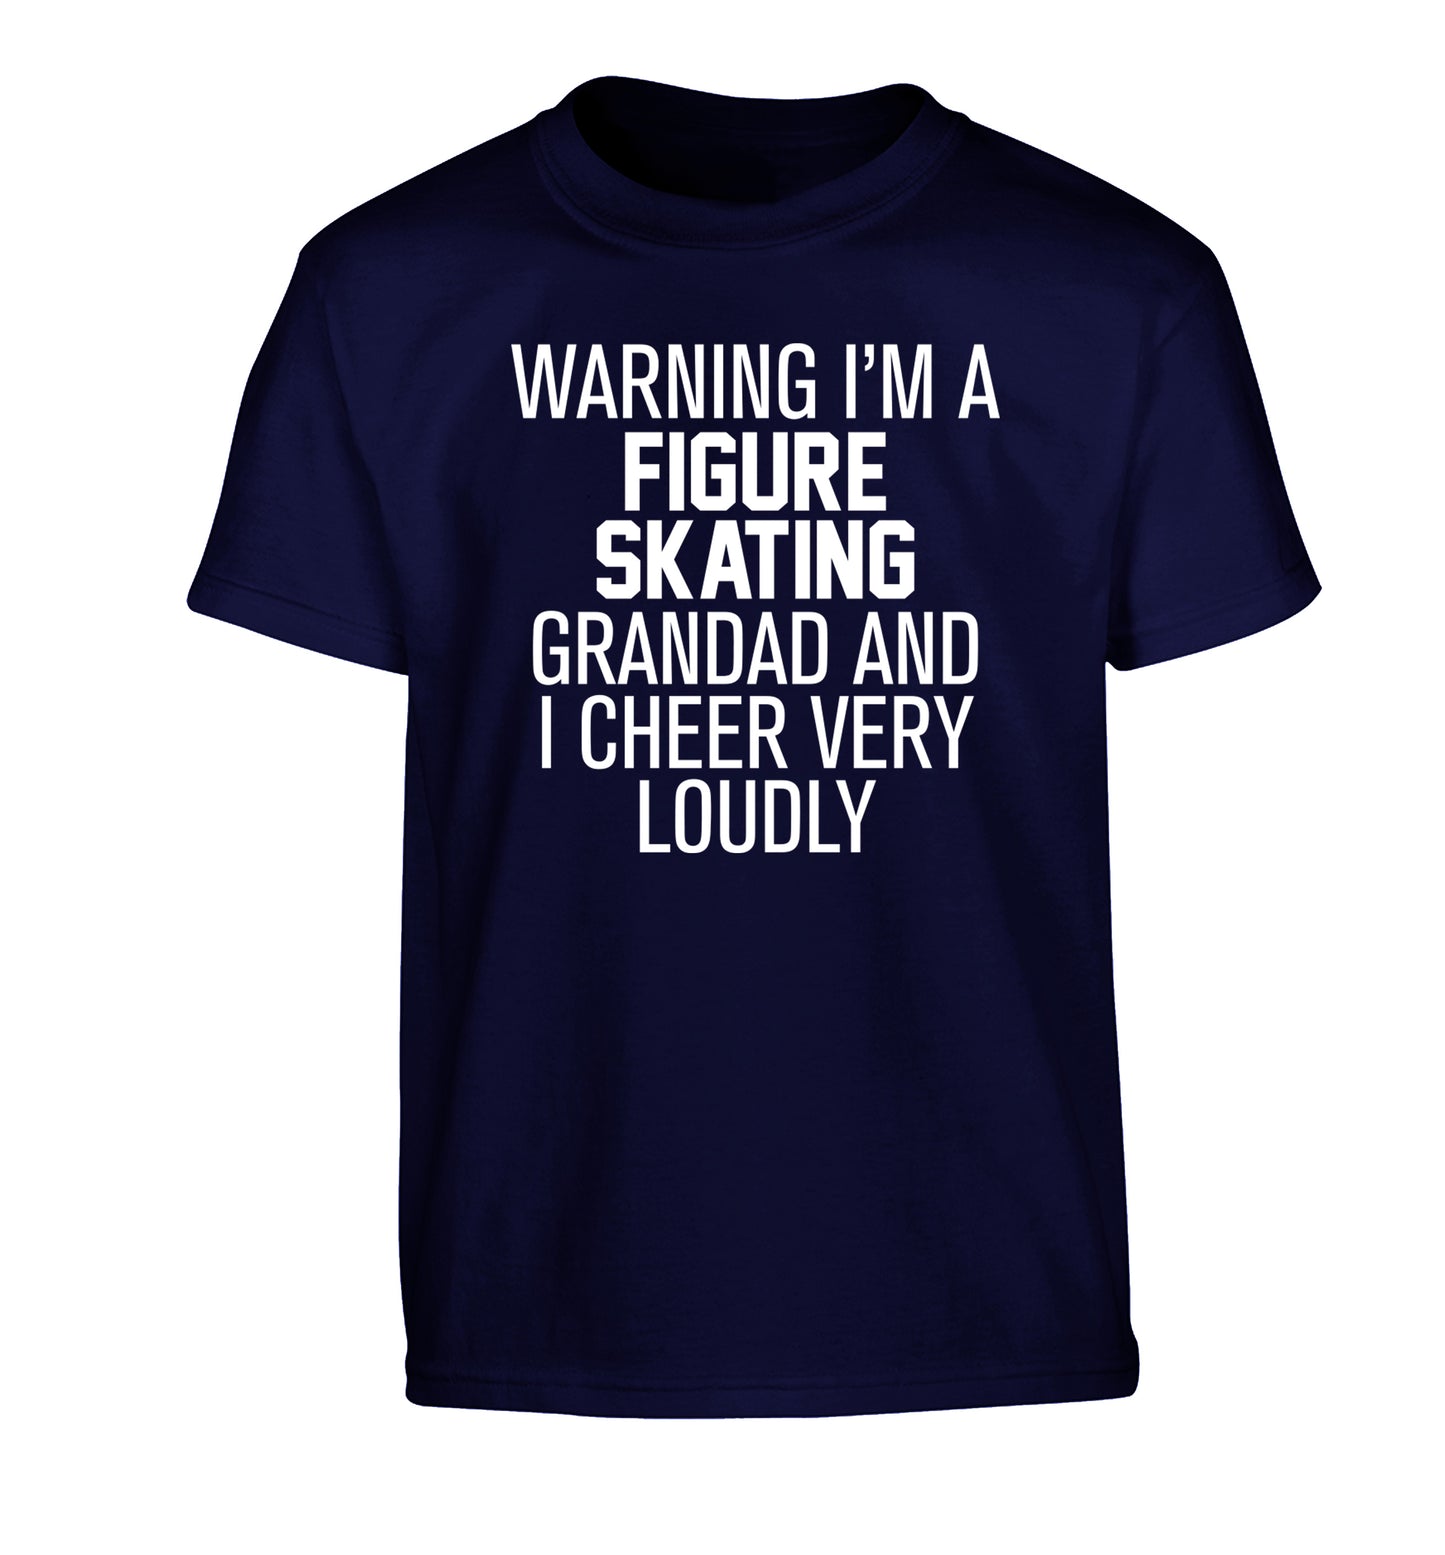 Warning I'm a figure skating grandad and I cheer very loudly Children's navy Tshirt 12-14 Years